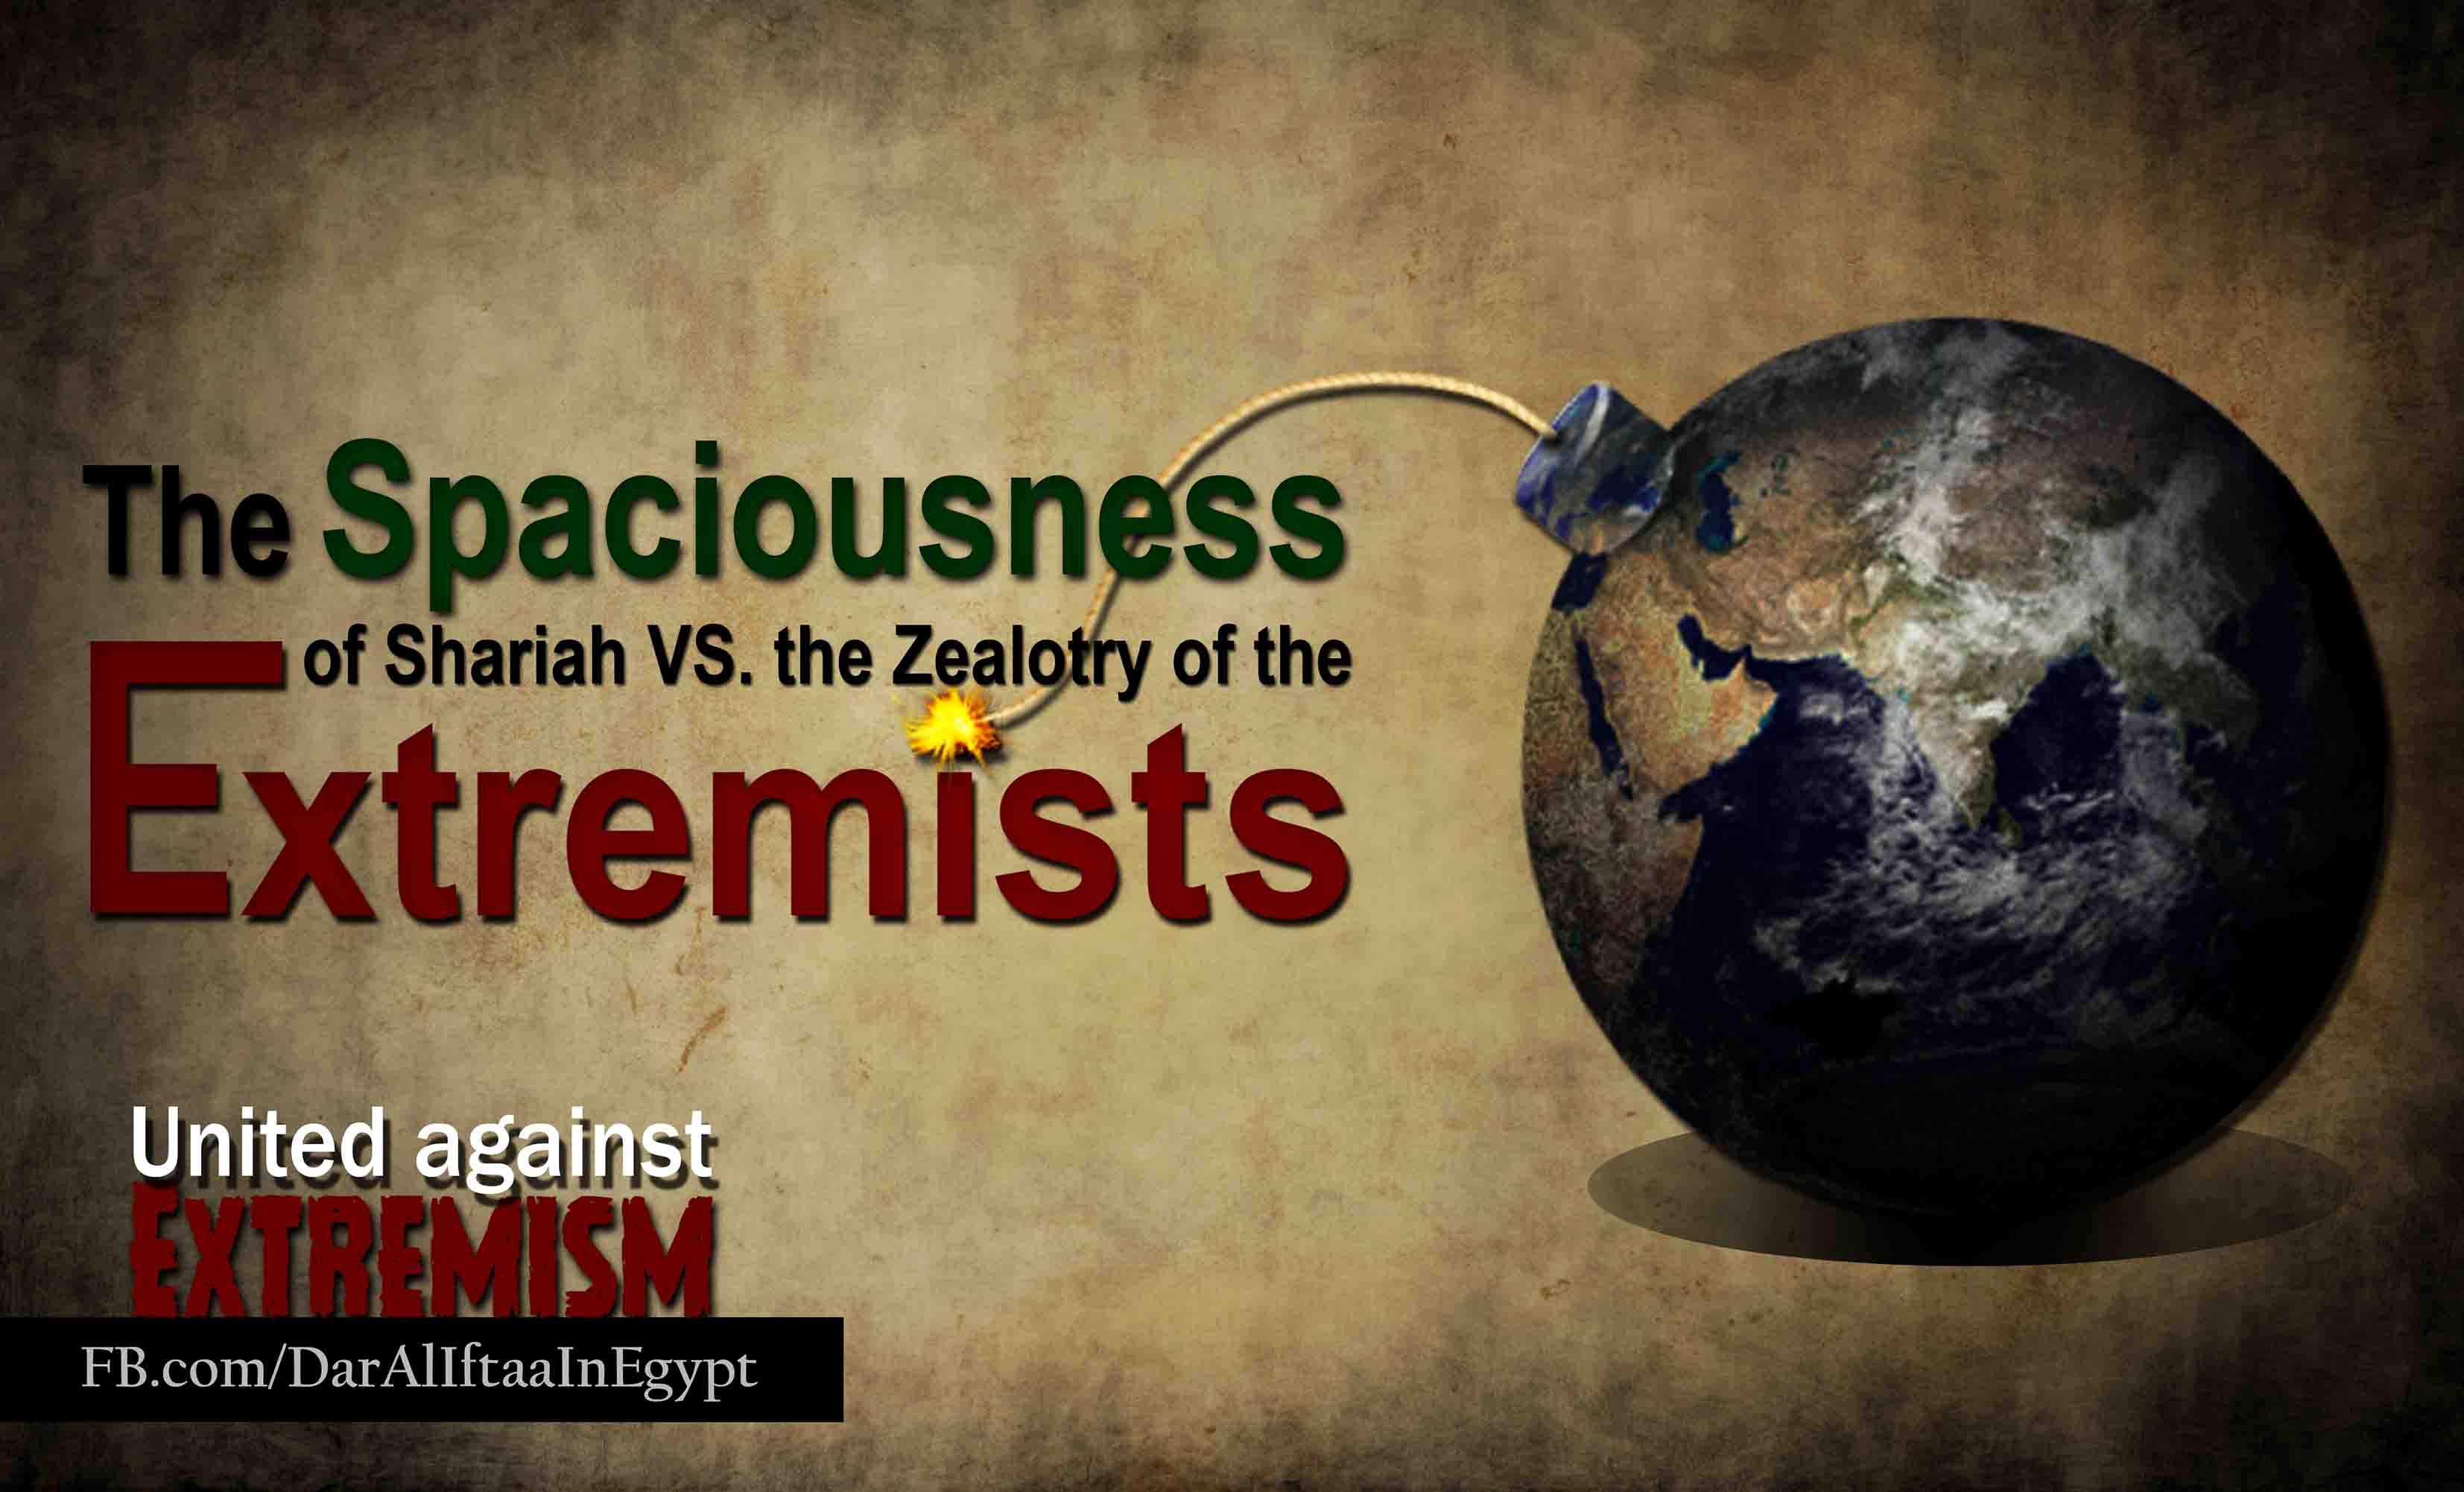 The Spaciousness of Shari'ah law Vs. the Zealotry of the Extremists